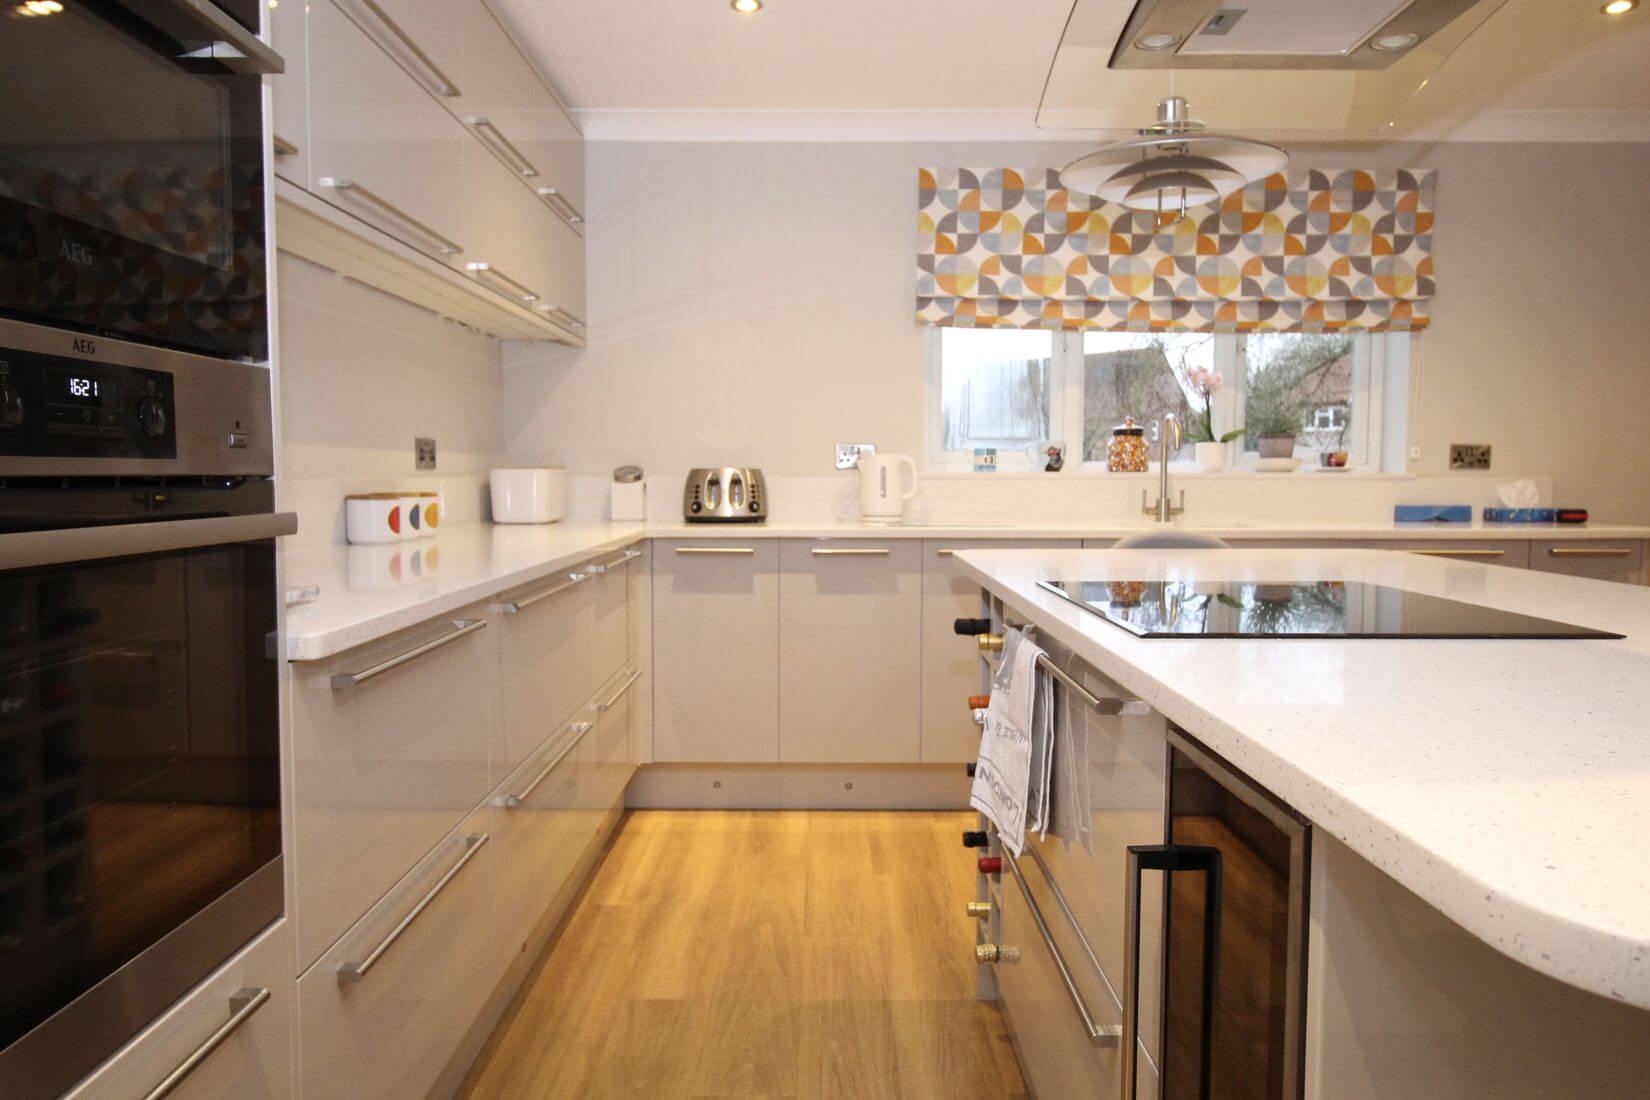 Modern kitchen renovation with gloss cupboards